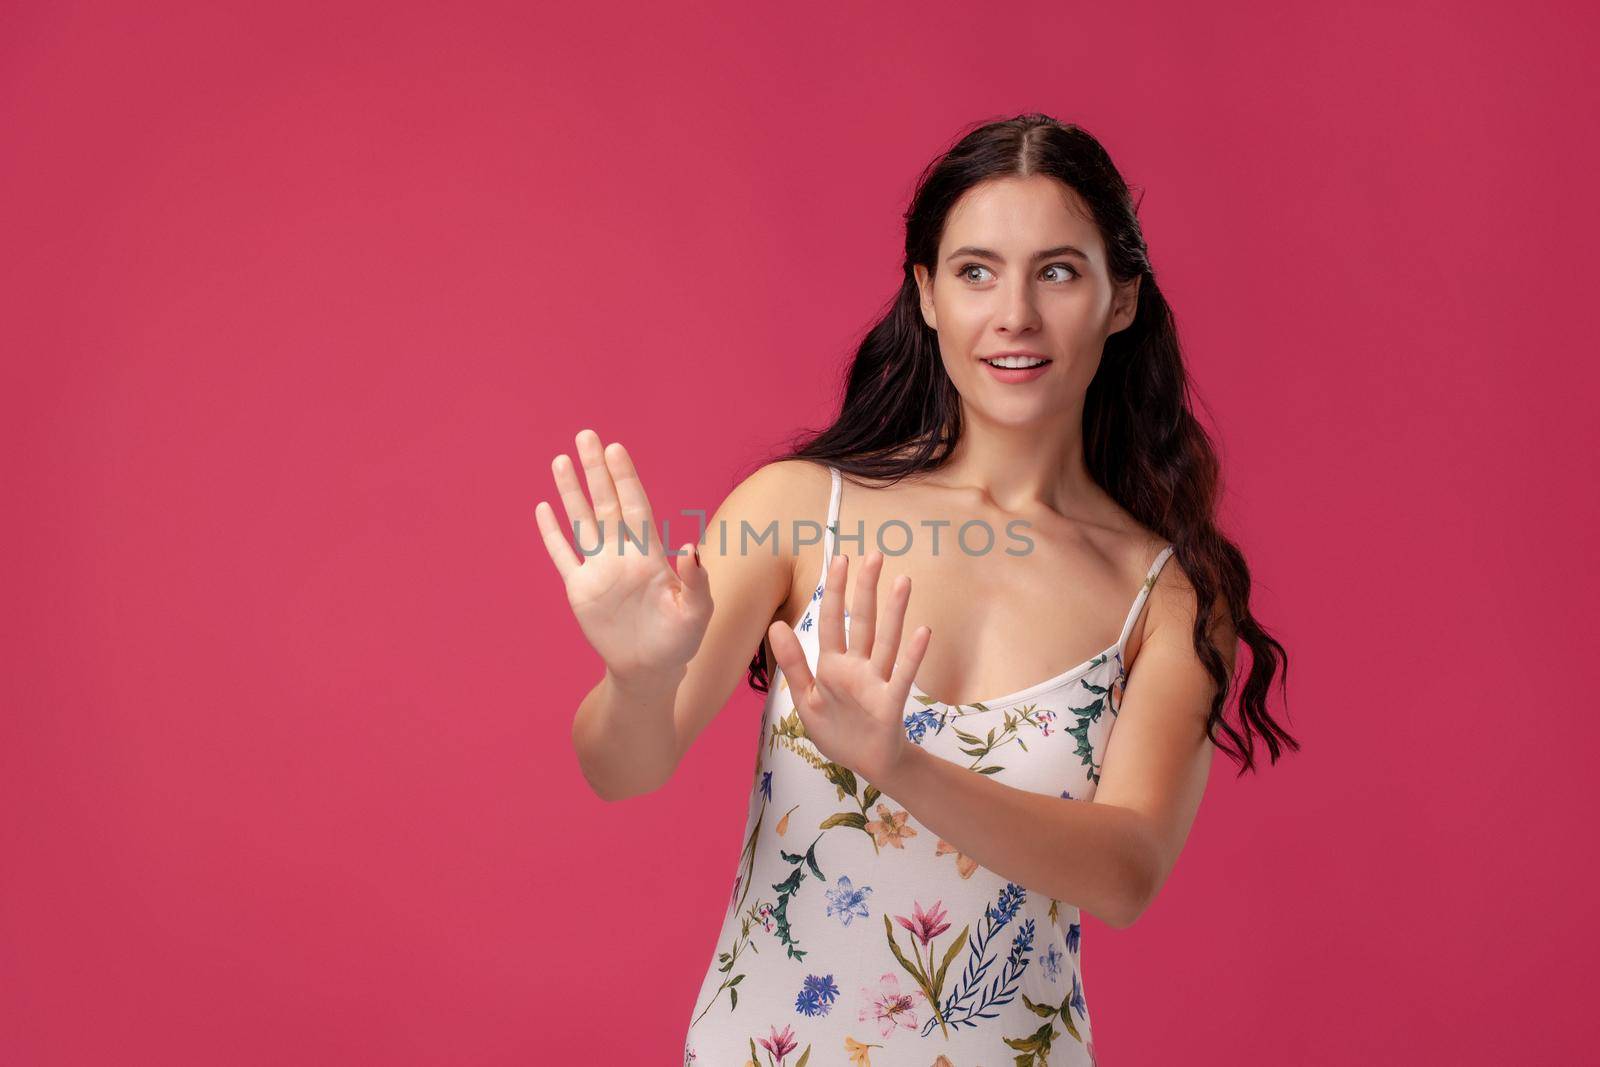 Portrait of a young pretty female in a white dress with floral print standing on a pink wall background in studio. She is acting like saying no to someone. People sincere emotions, lifestyle concept. Mockup copy space.